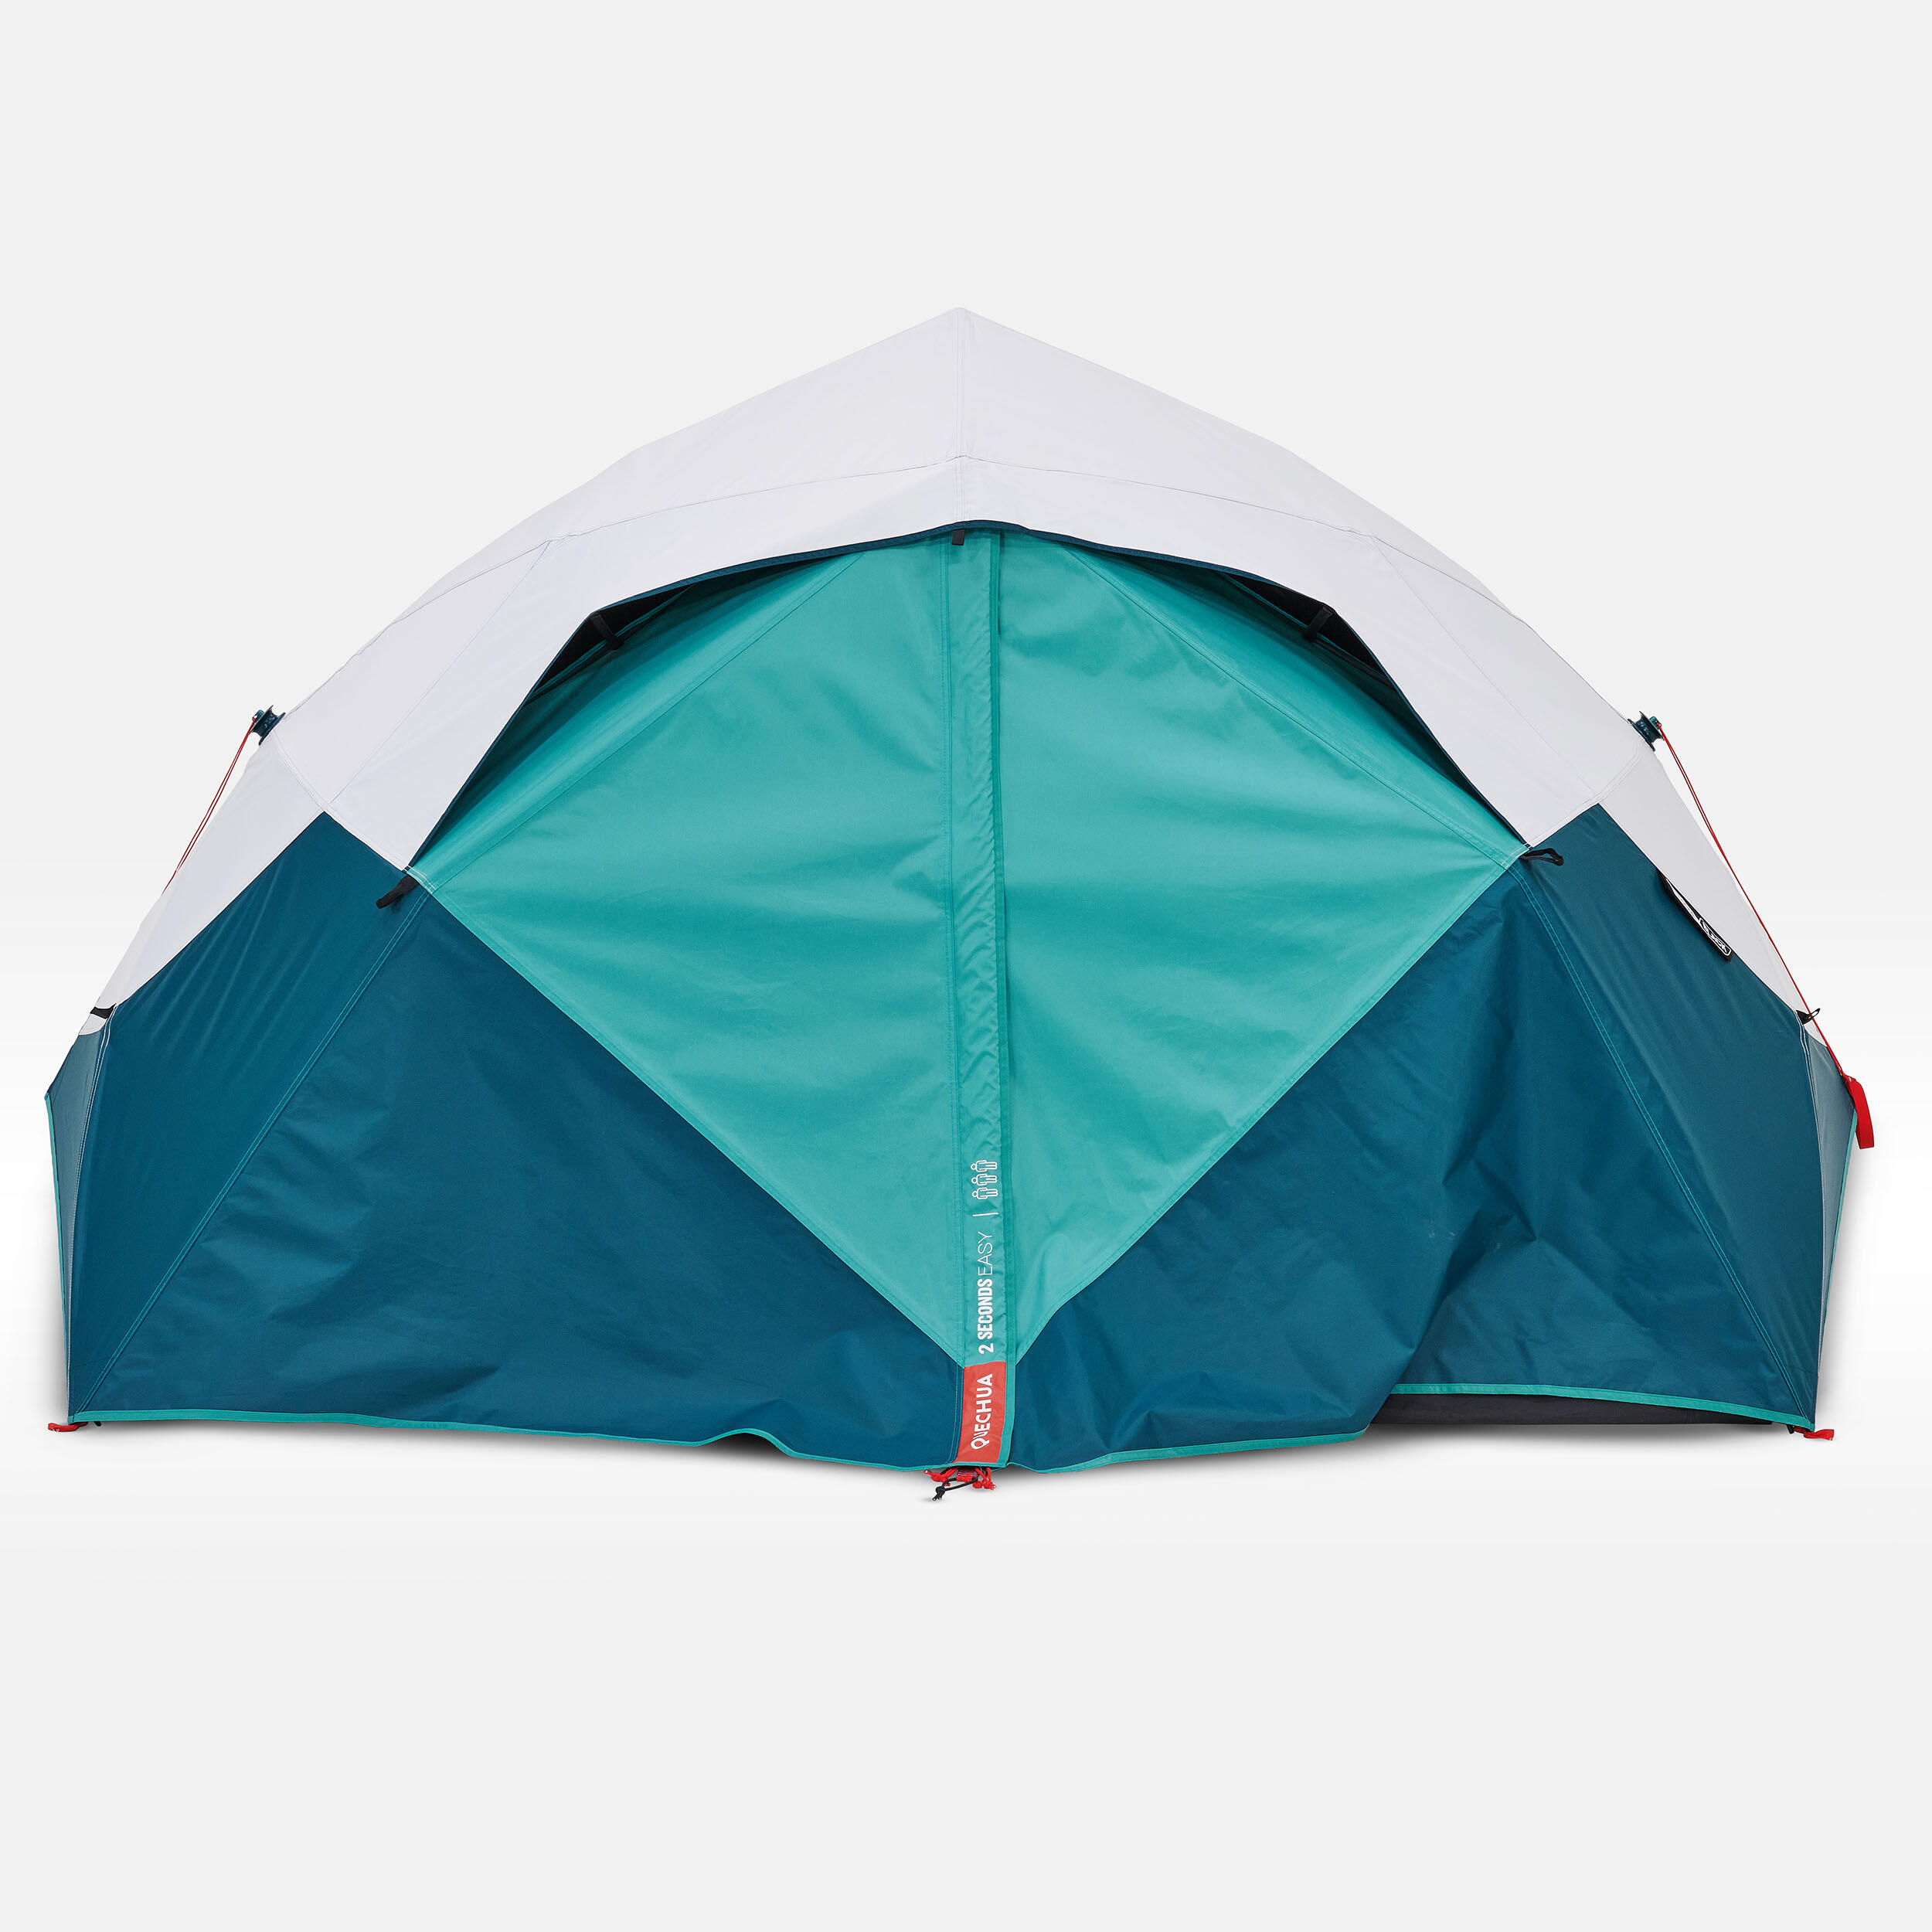 3-person 2 Seconds Easy Fresh & Black Camping Tent - Blue